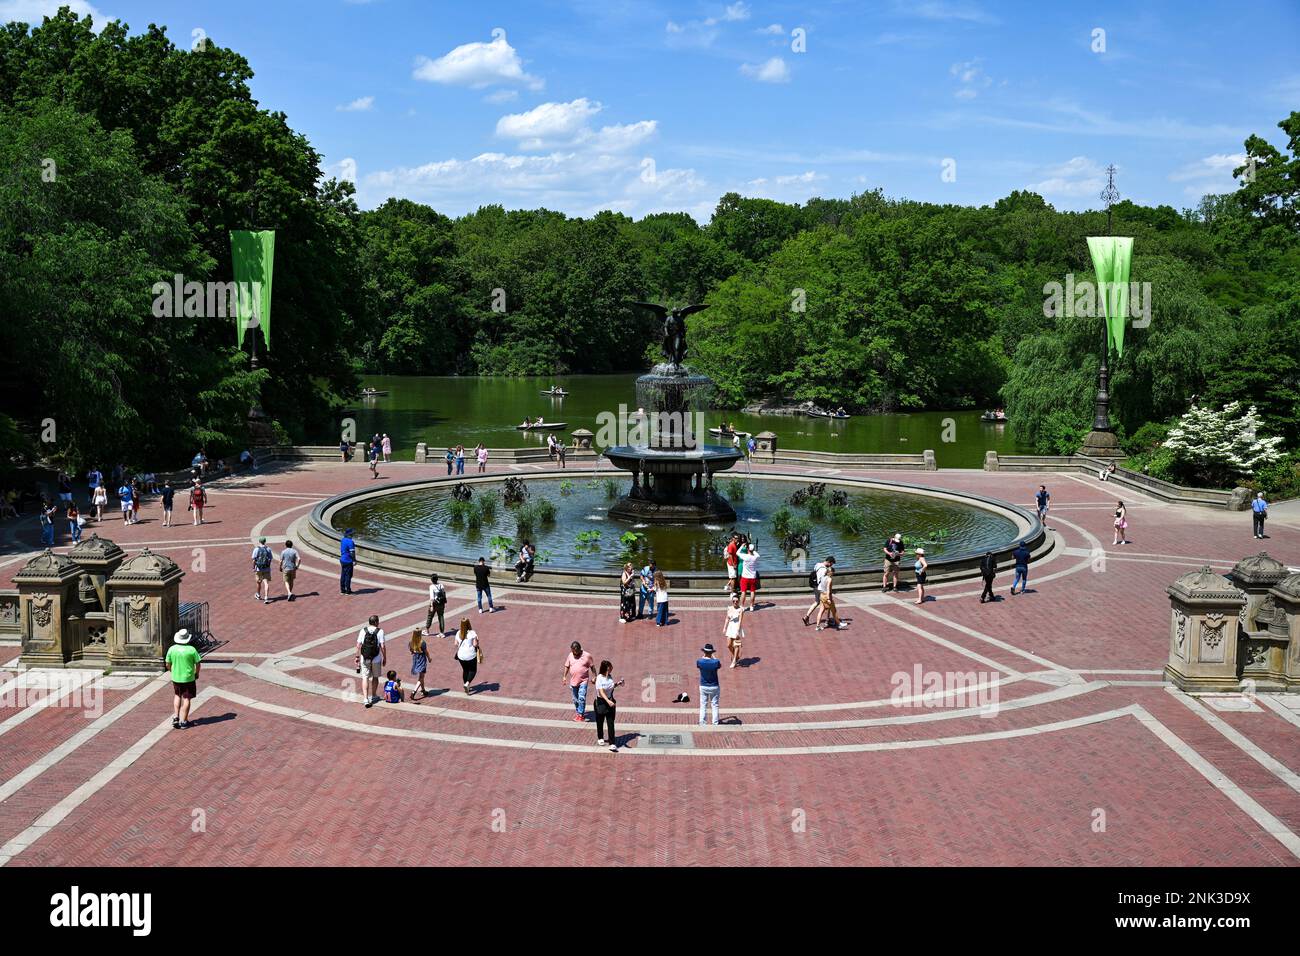 Let's celebrate #Pride at Bethesda Fountain in Central Park! We're